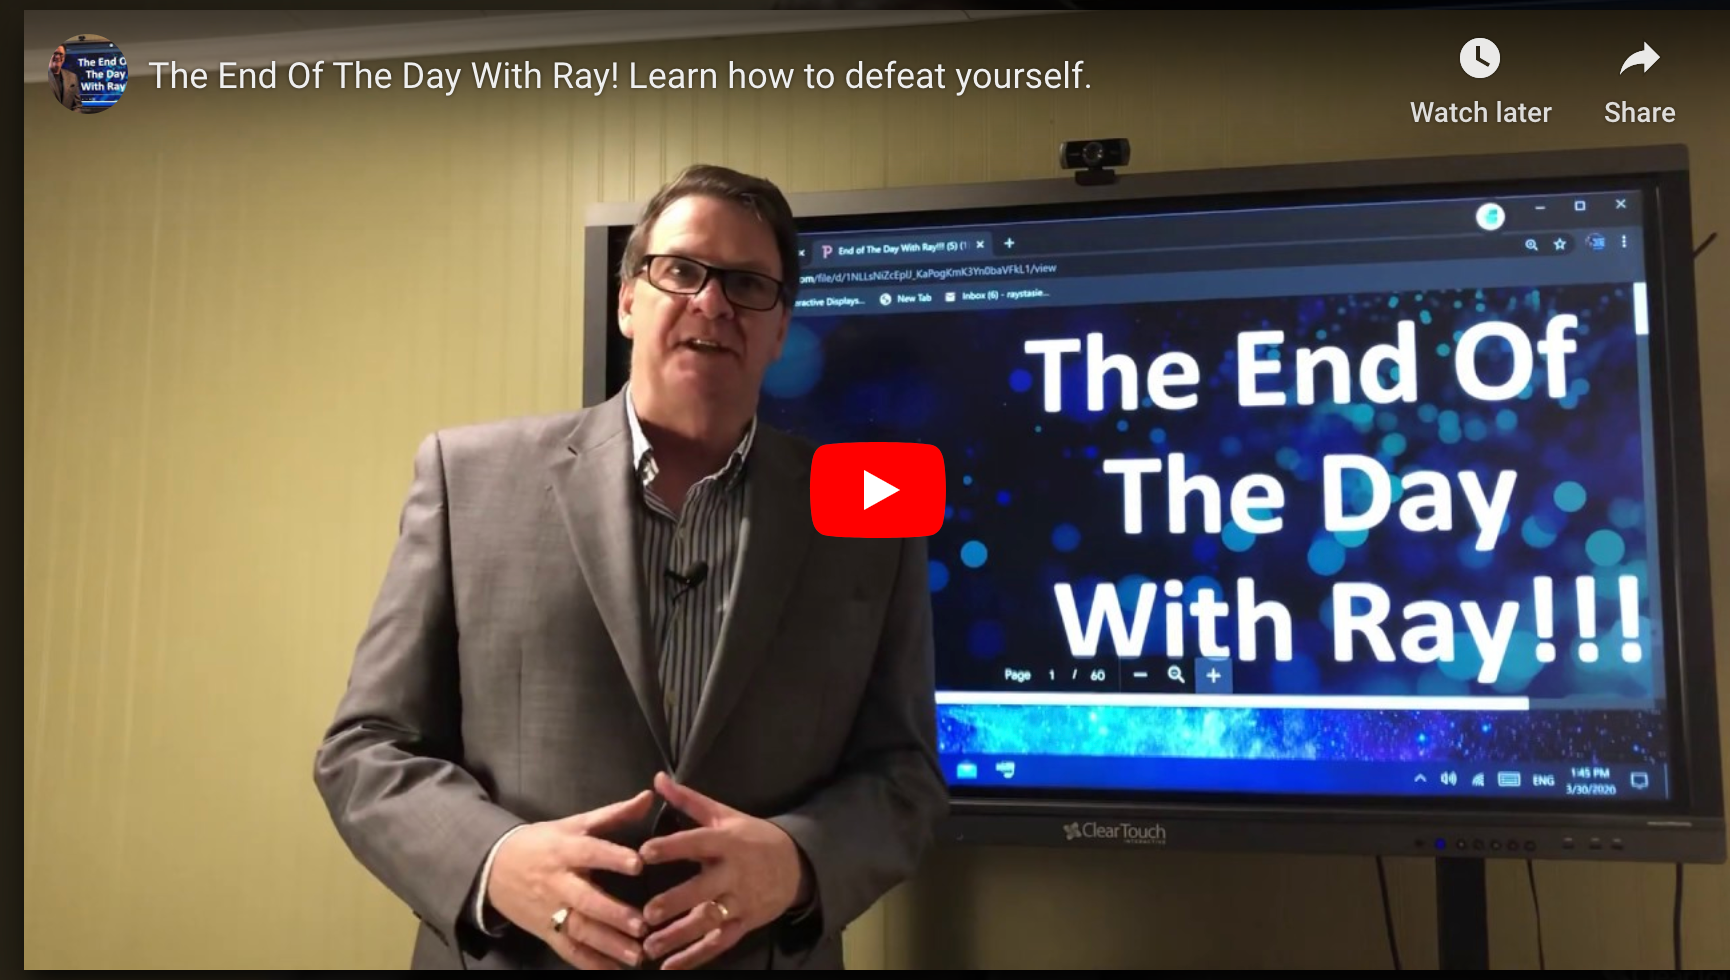 The End Of The Day With Ray! Learn how to defeat yourself.